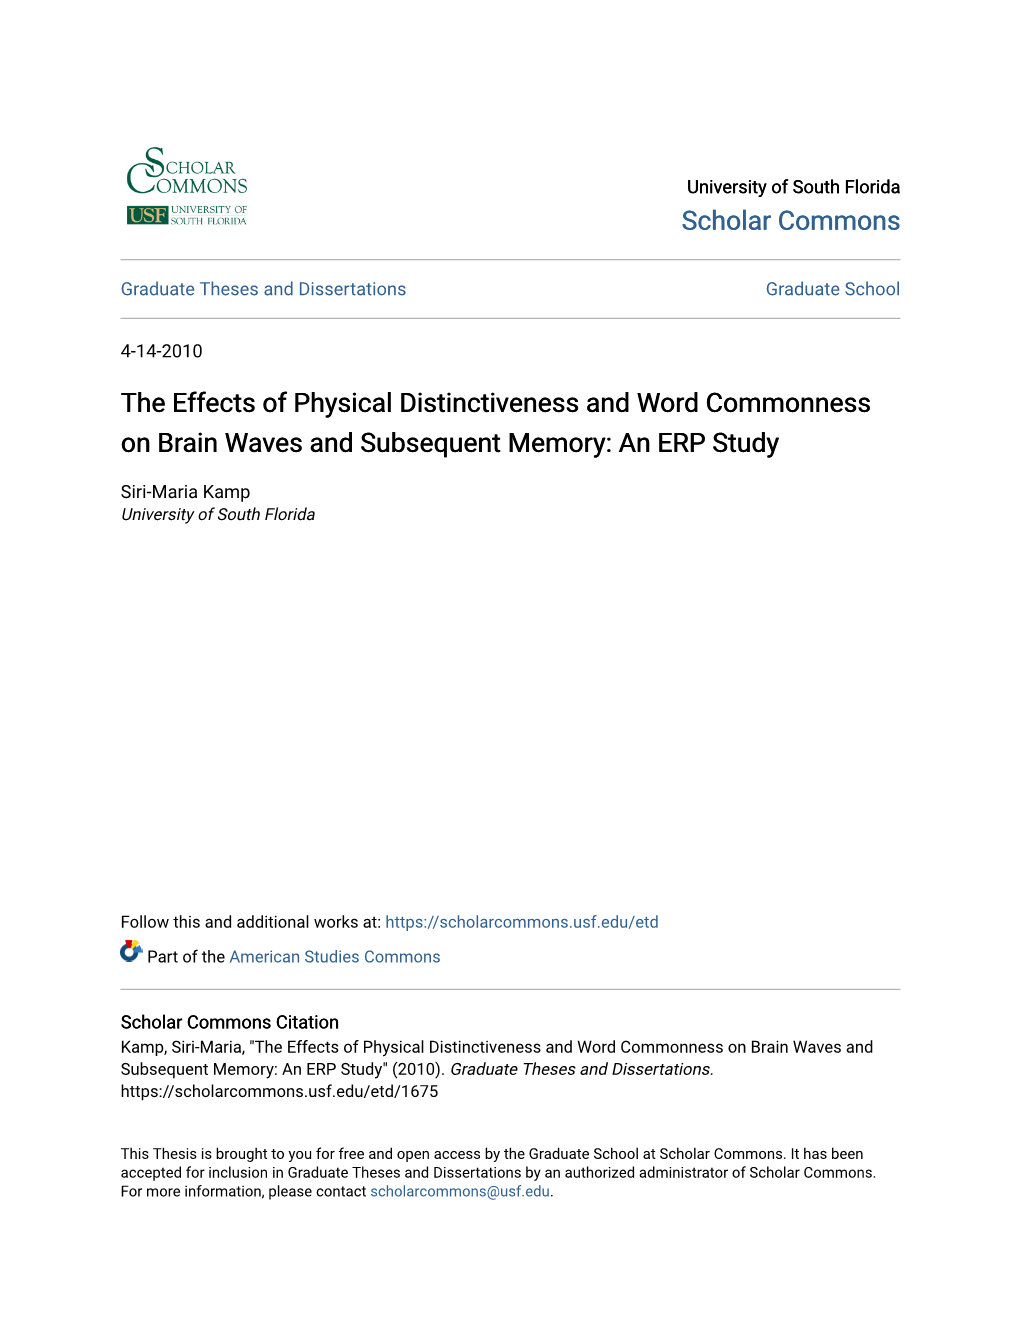 The Effects of Physical Distinctiveness and Word Commonness on Brain Waves and Subsequent Memory: an ERP Study